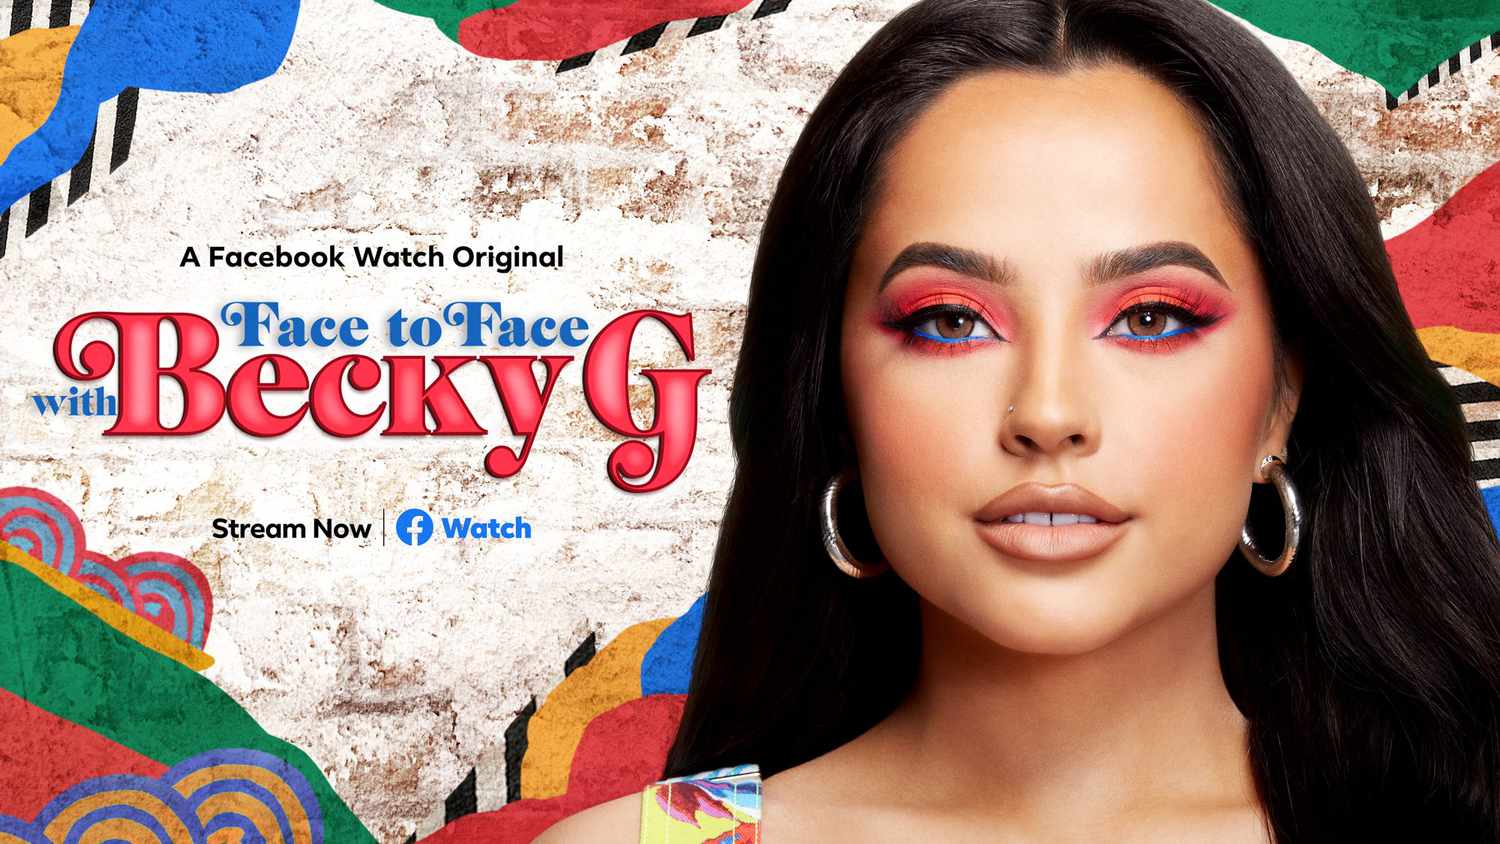 Becky G's new show, Face to Face